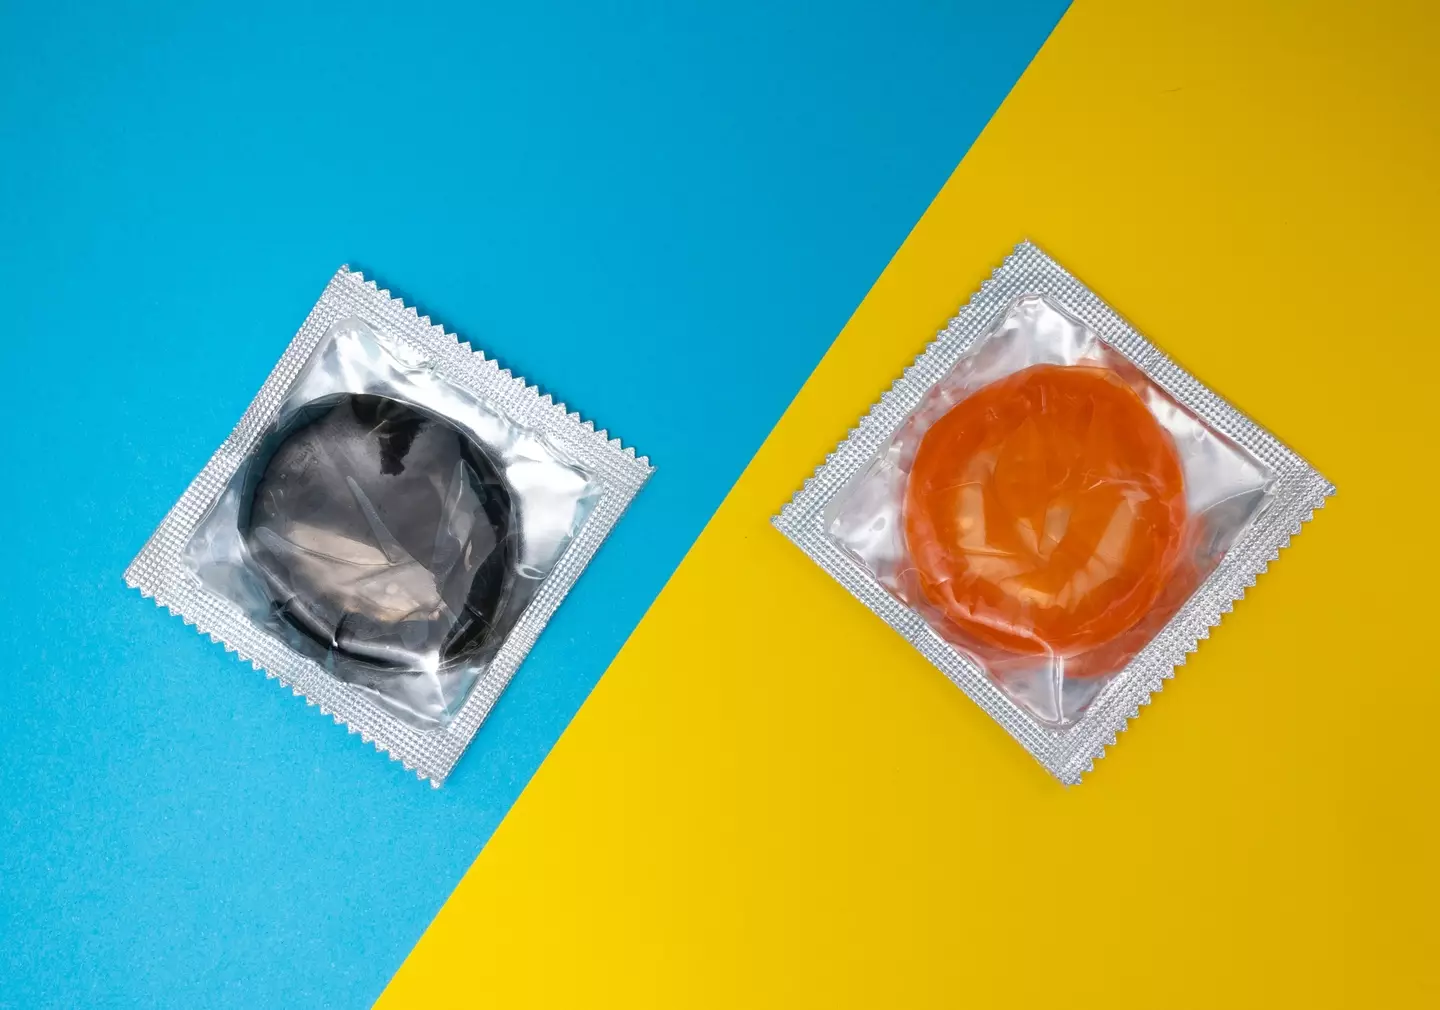 Those who previously had the virus should use condoms for eight weeks after infection.